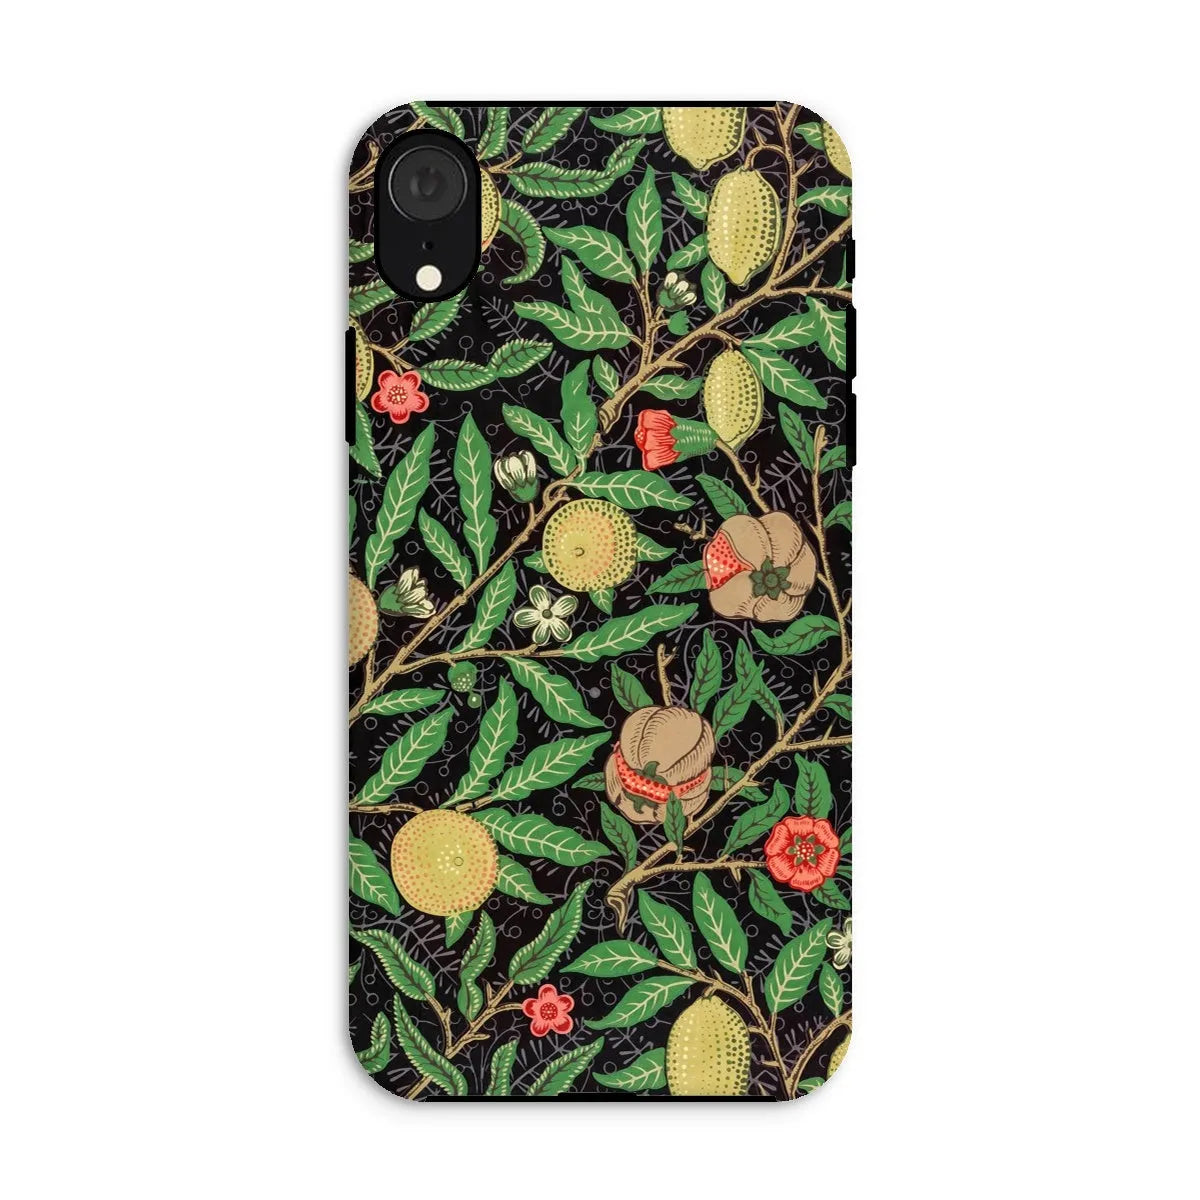 Four Fruits Too Aesthetic Pattern Phone Case - William Morris - Iphone Xr / Matte - Mobile Phone Cases - Aesthetic Art